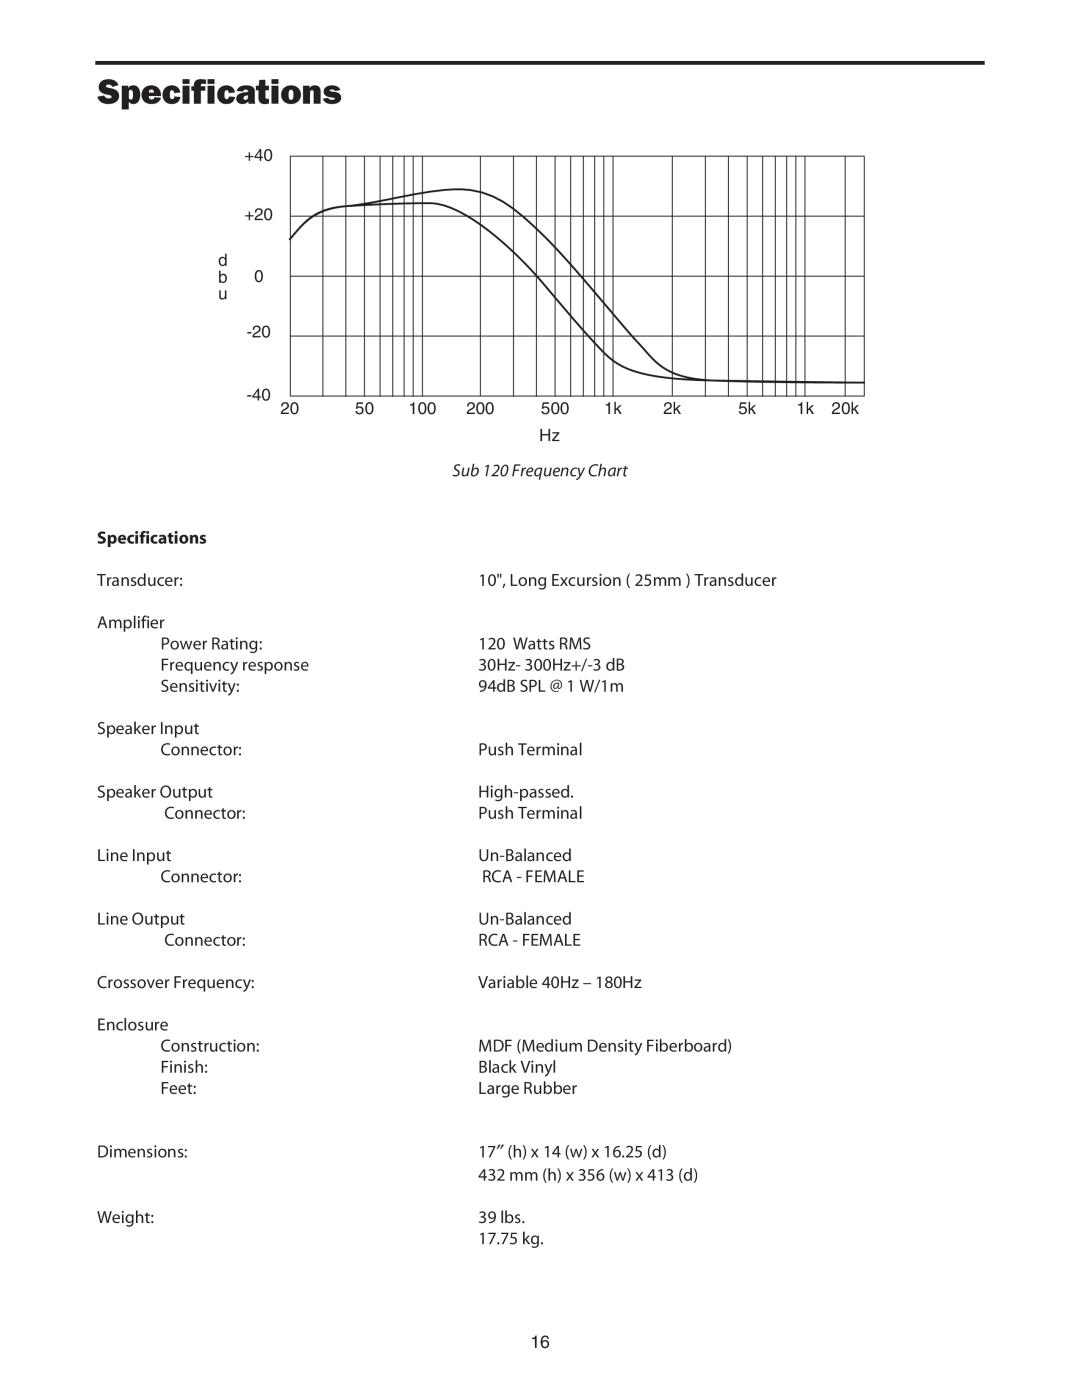 Samson Sub120 owner manual Specifications, Sub 120 Frequency Chart 